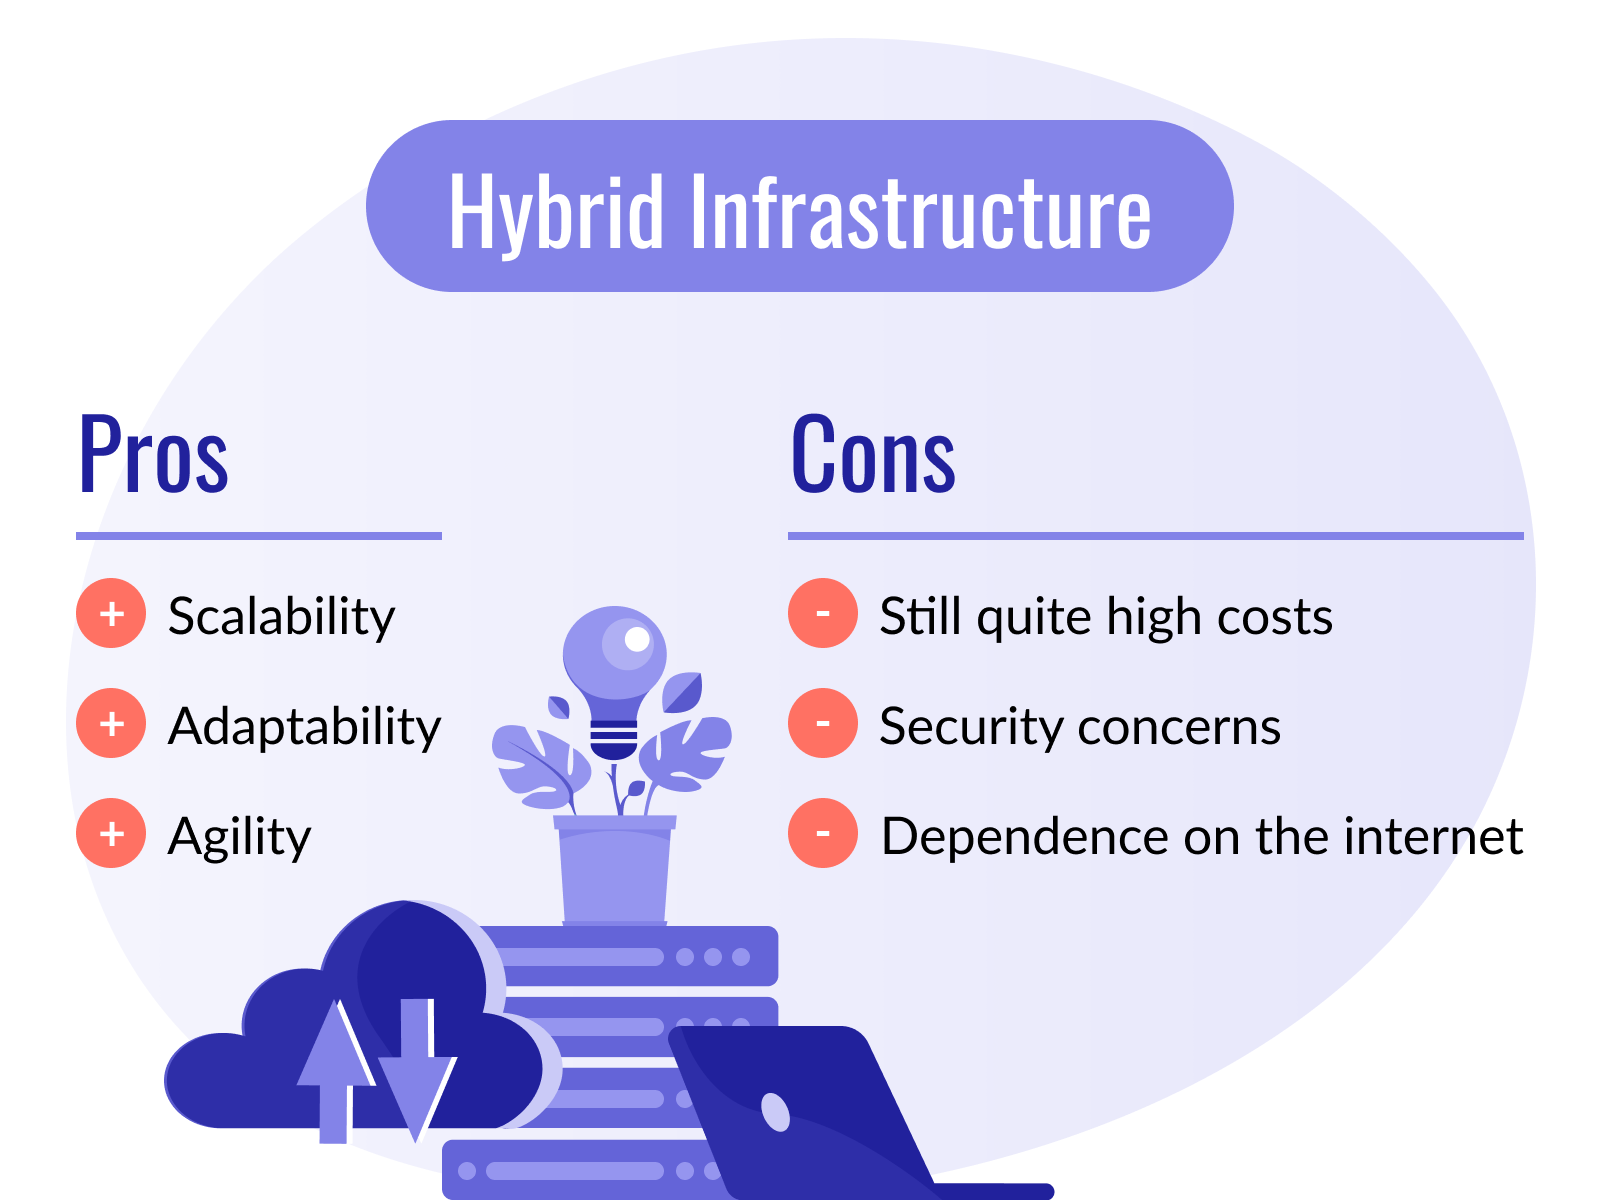 Pros and cons of hybrid infrastructure